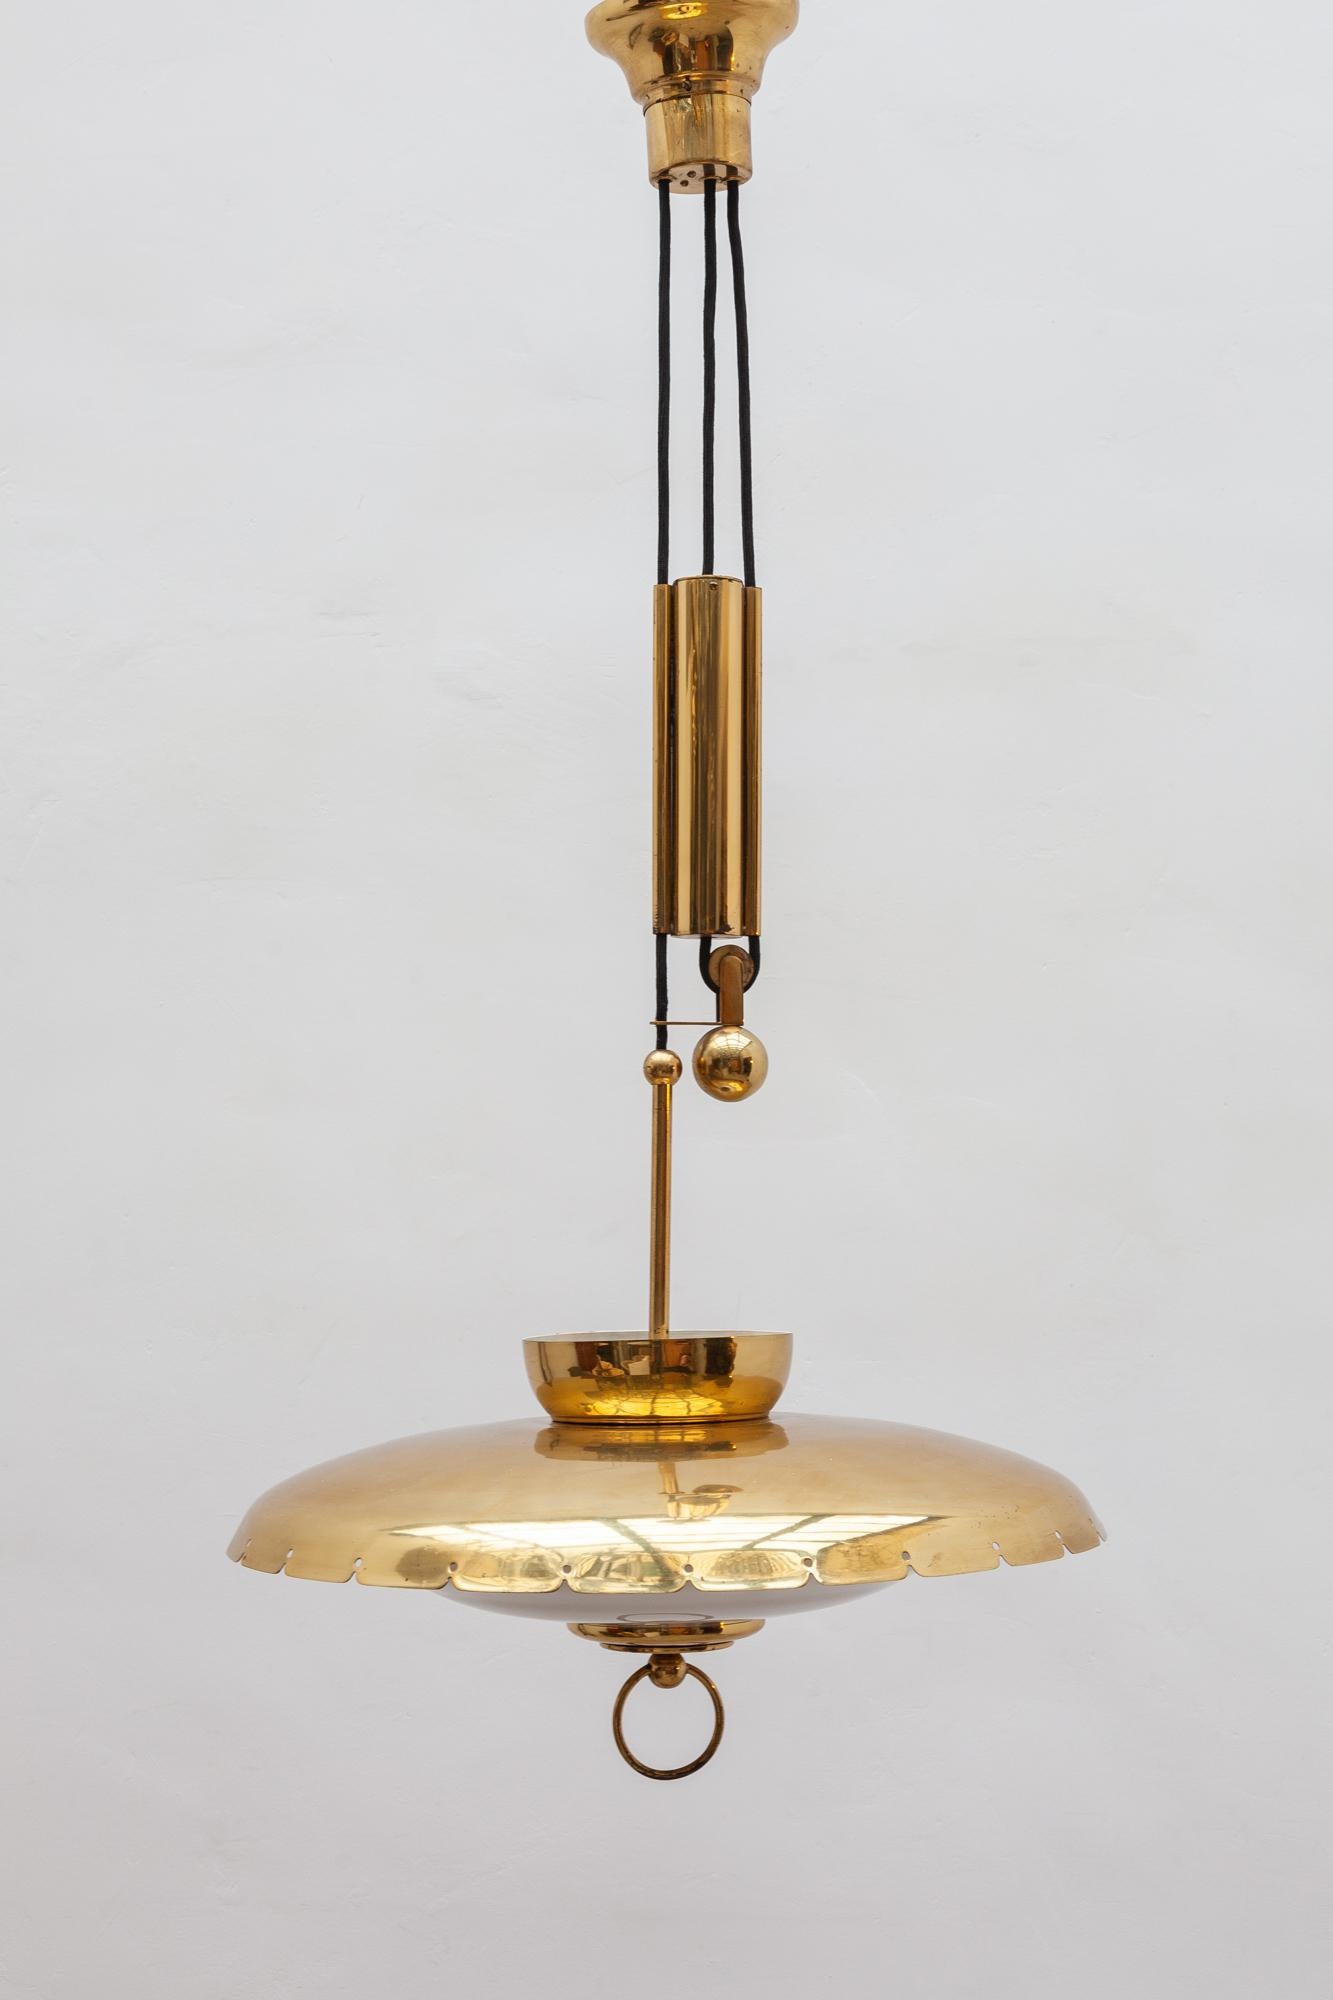 Gerald Thurston pull down pendant with glass shade and perforated brass elements a beautiful rare pendant 1950s.